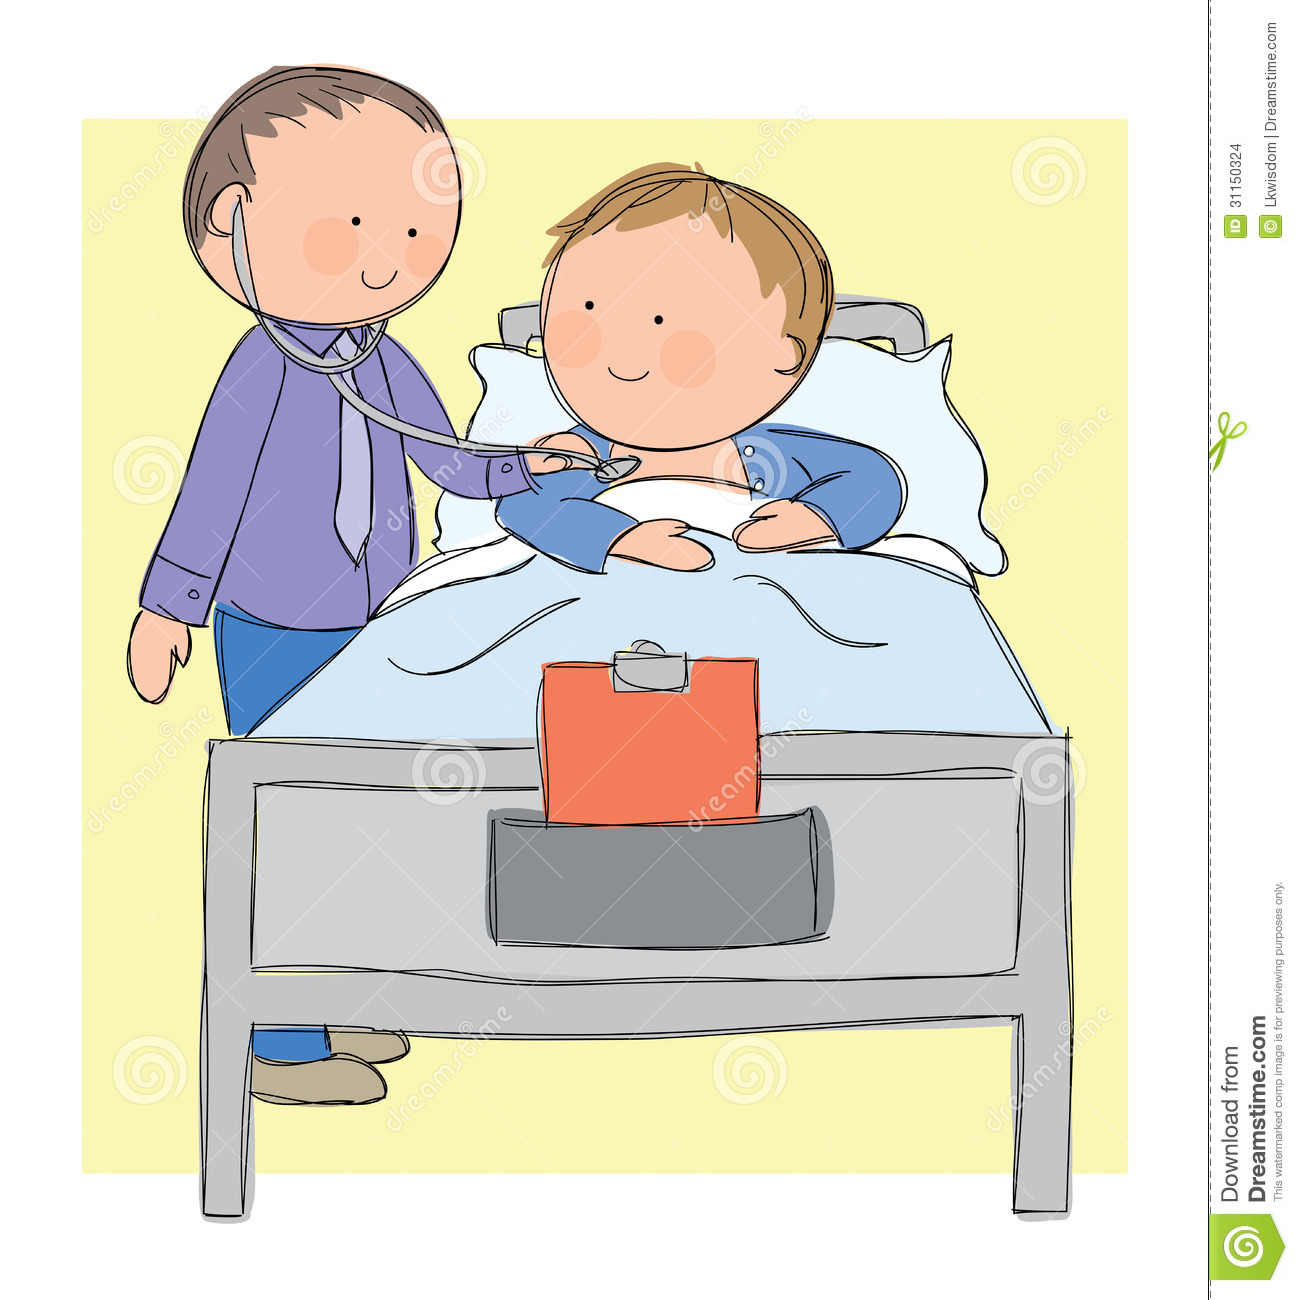 Hand Drawn Picture Of Doctor Checking On Patient  Illustrated In A